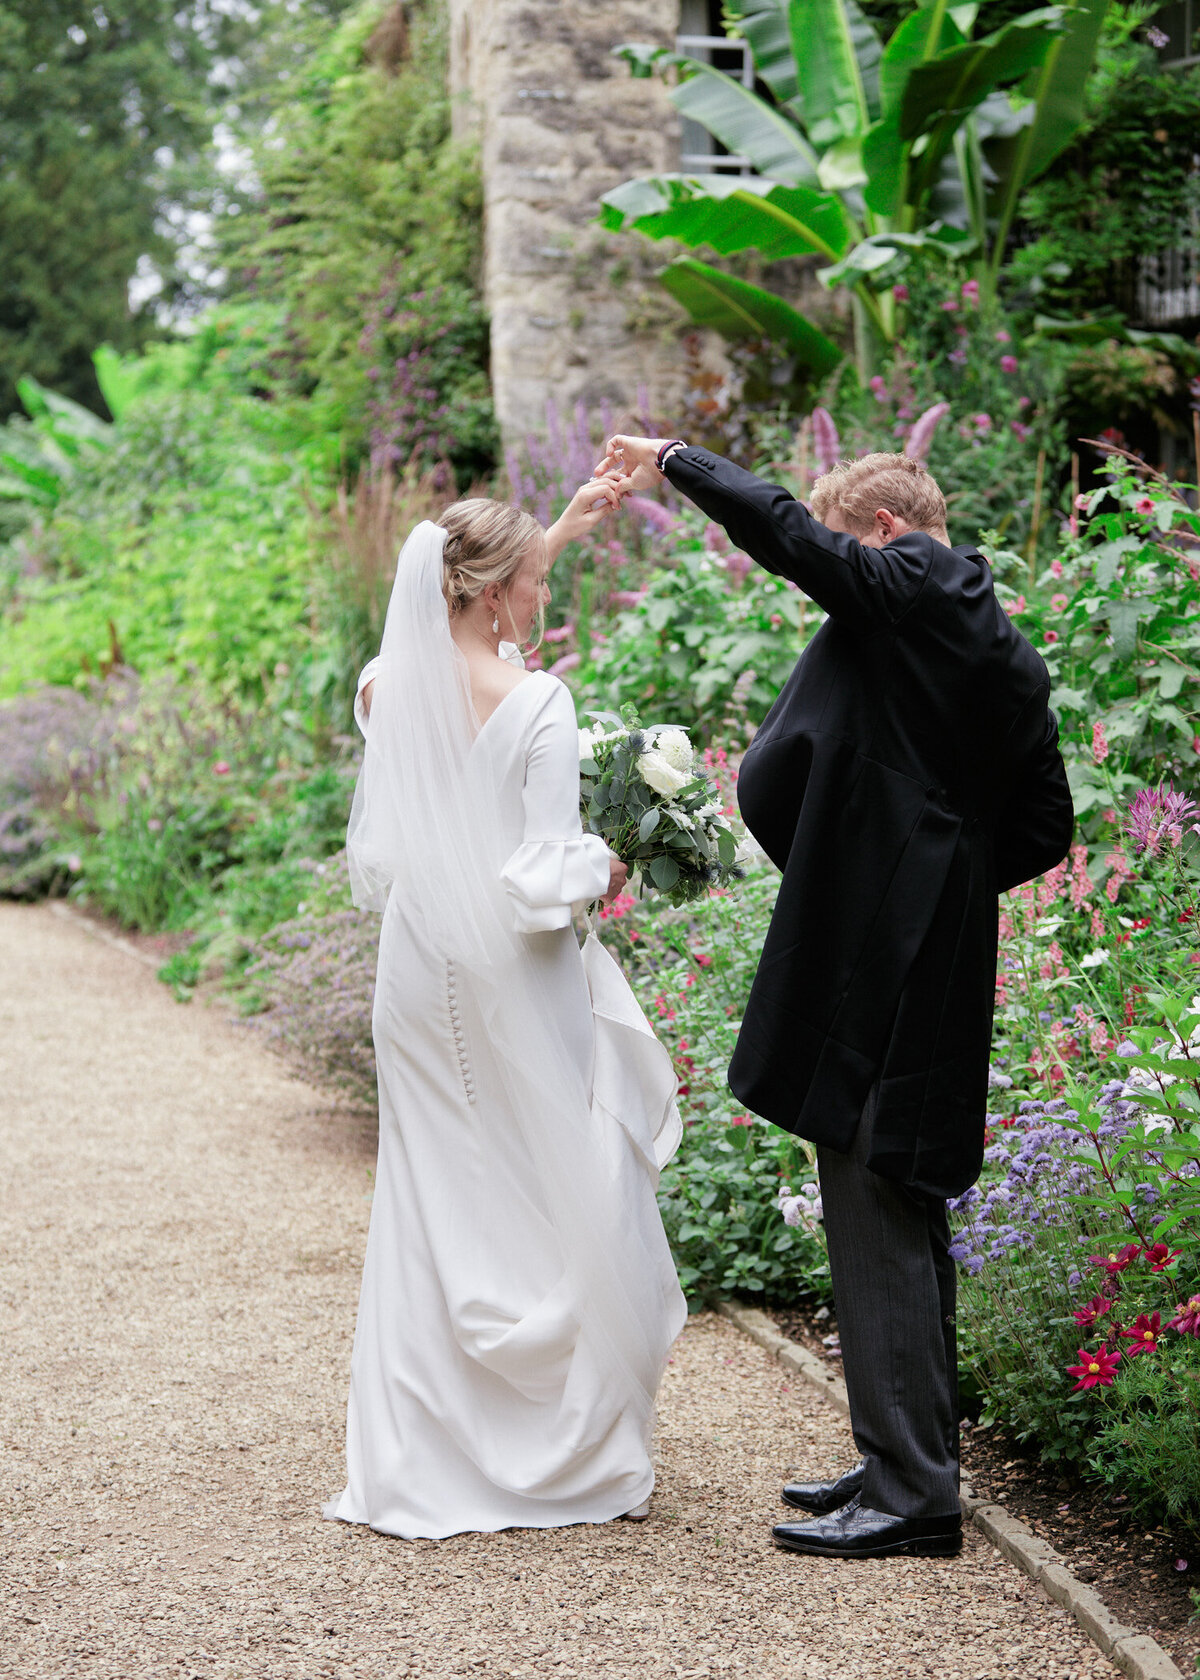 bride and groom dancing at their wedding at Worcester college gardens surrounded by greenery and garden flowers